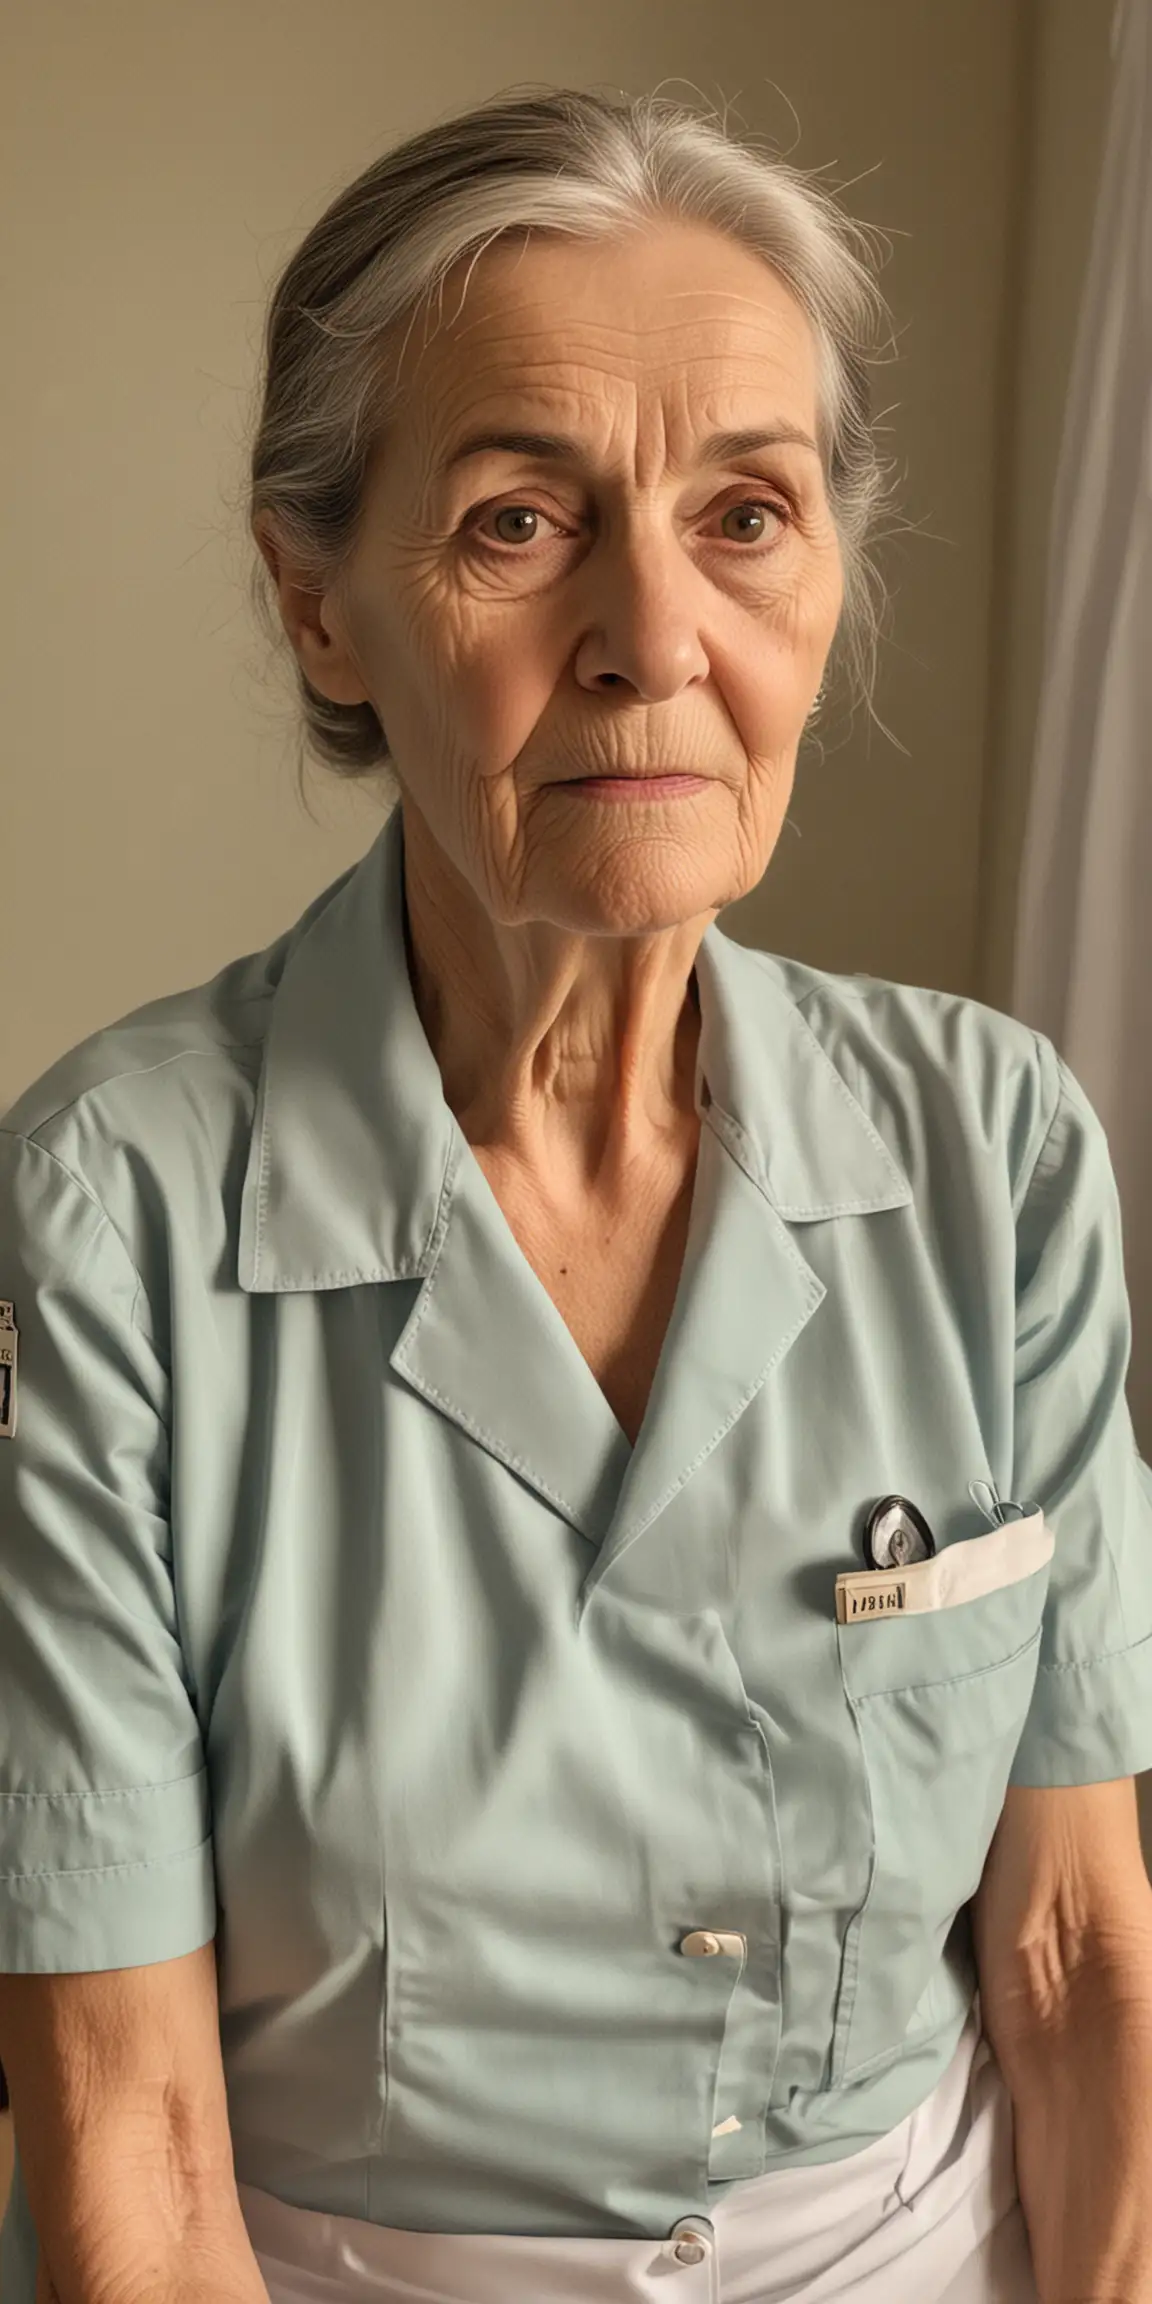 ugc image of a 84 year old nurse, wearing uniform, looks sick or unhealthy